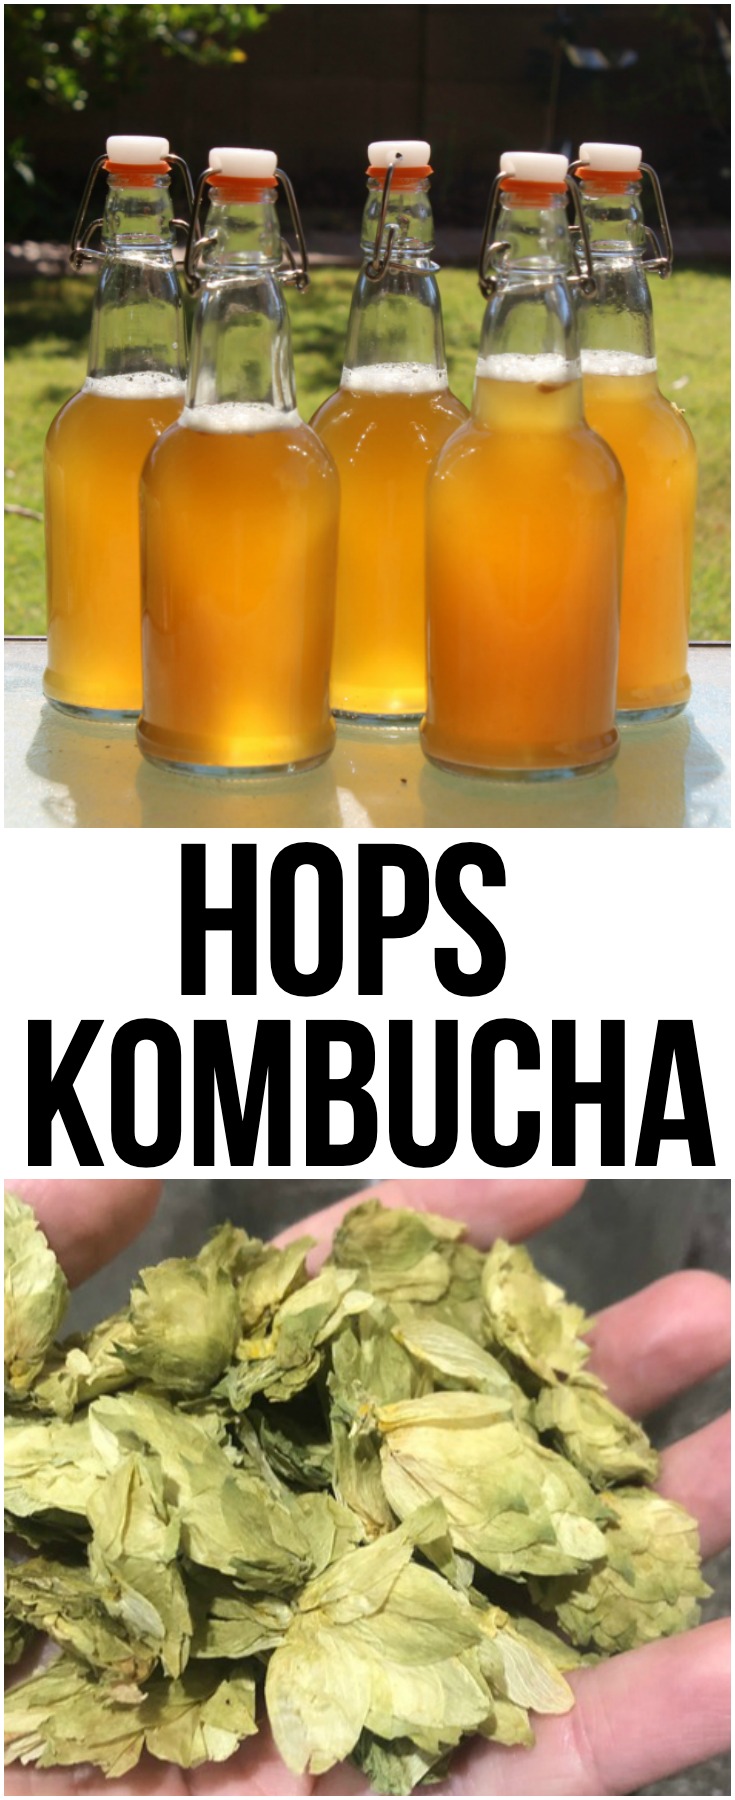 Delicious home brewed hops kombucha with a combination of aromatic pine, citrus, and floral notes full of gut-healthy probiotics.  #hops #kombucha #probiotic #gut #health #fermentation